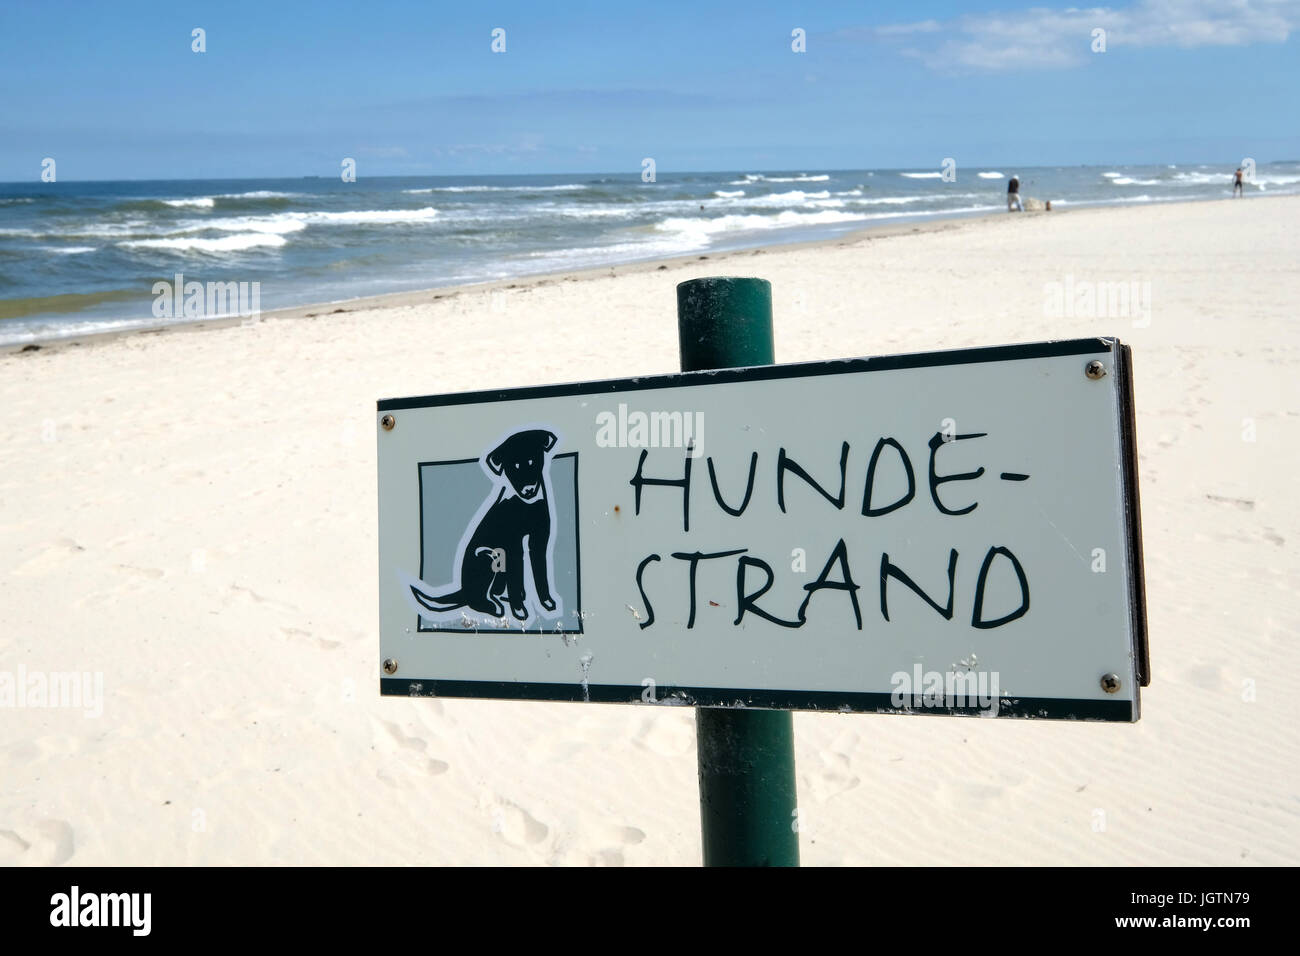 Sign says 'dogs beach' (Hunde-Strand), pets allowed beach on the island of Spiekeroog, Germany Stock Photo